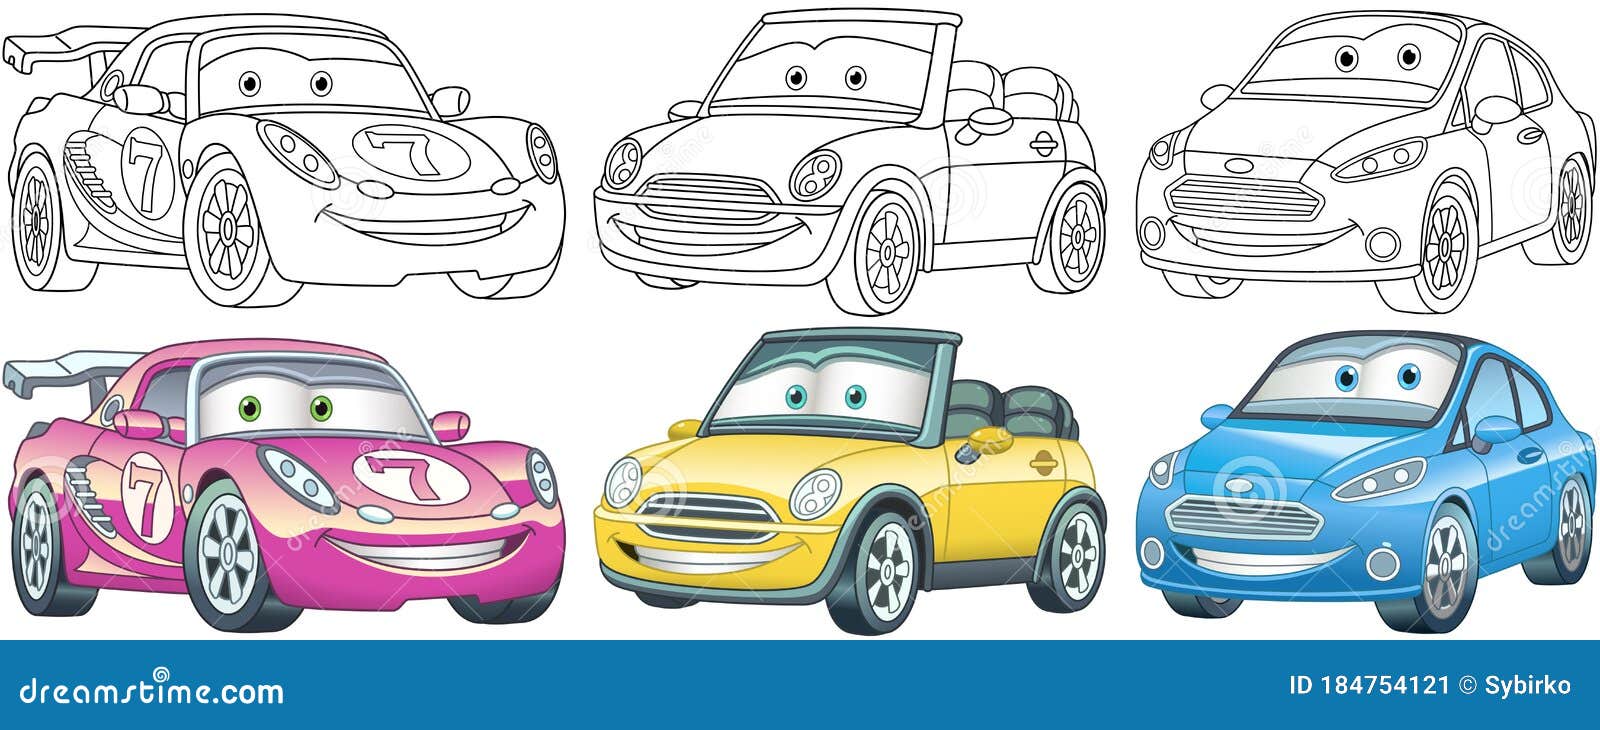 Cartoon Cars Coloring Pages Set Stock Vector - Illustration Of Face, Black:  184754121